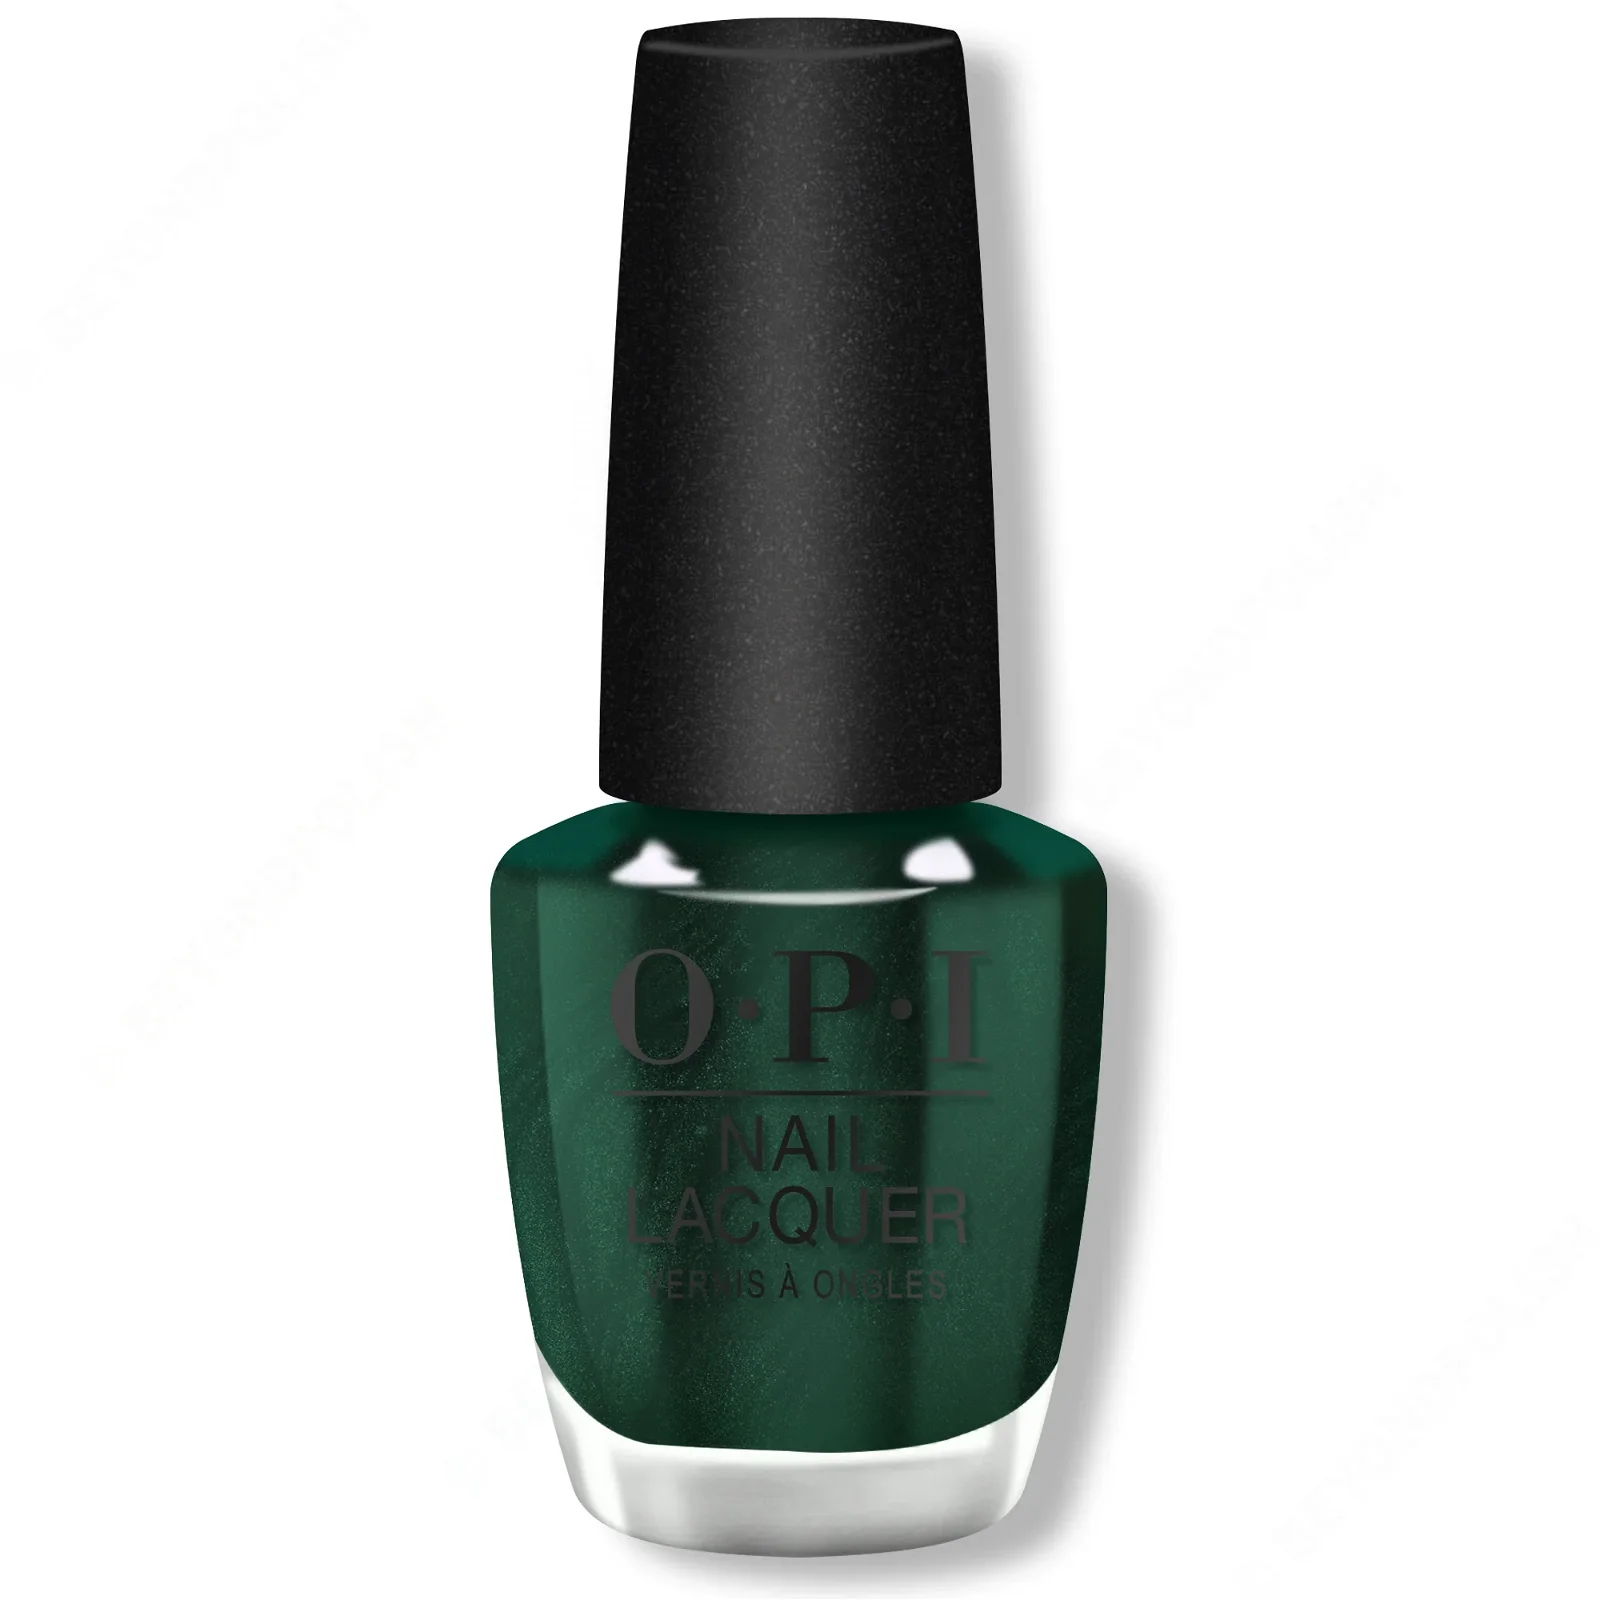 Image of OPI Nail Lacquer - Peppermint Bark and Bite 0.5 oz - #NLHRQ01